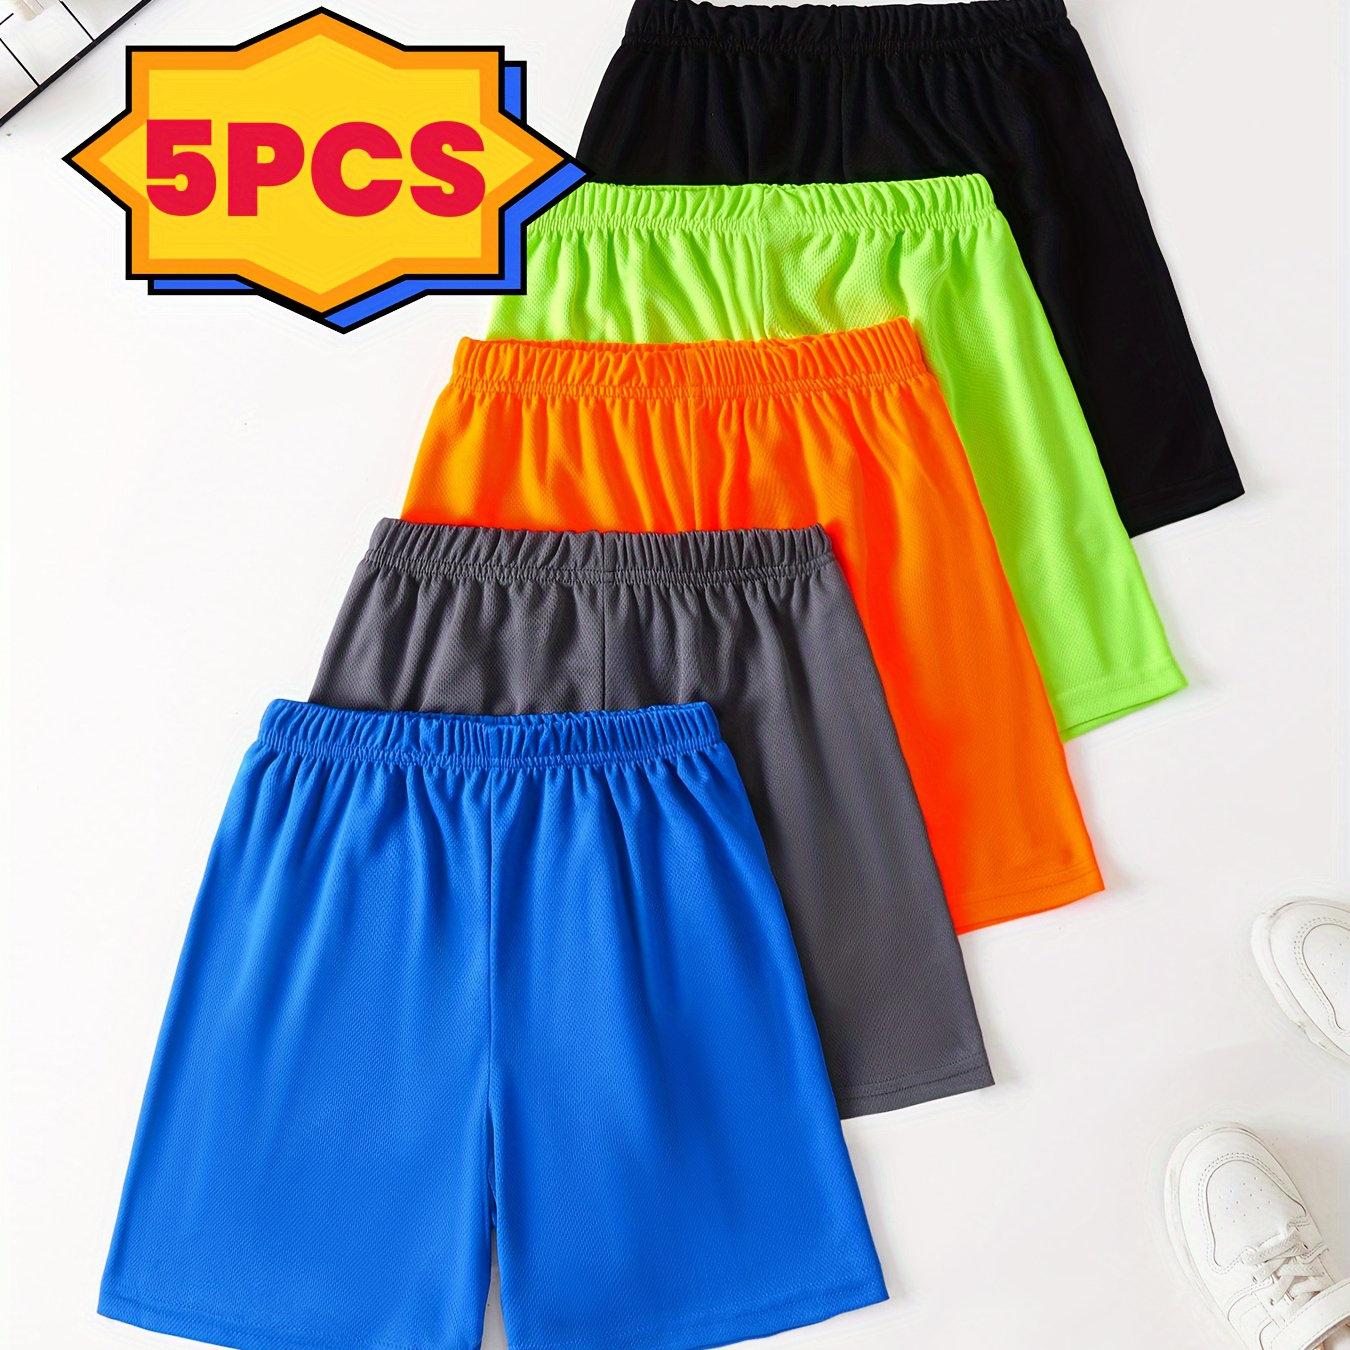 

5-pack Boys Breathable Mesh Quick Dry Casual Track Shorts Set, Comfy Shorts For Spring/summer